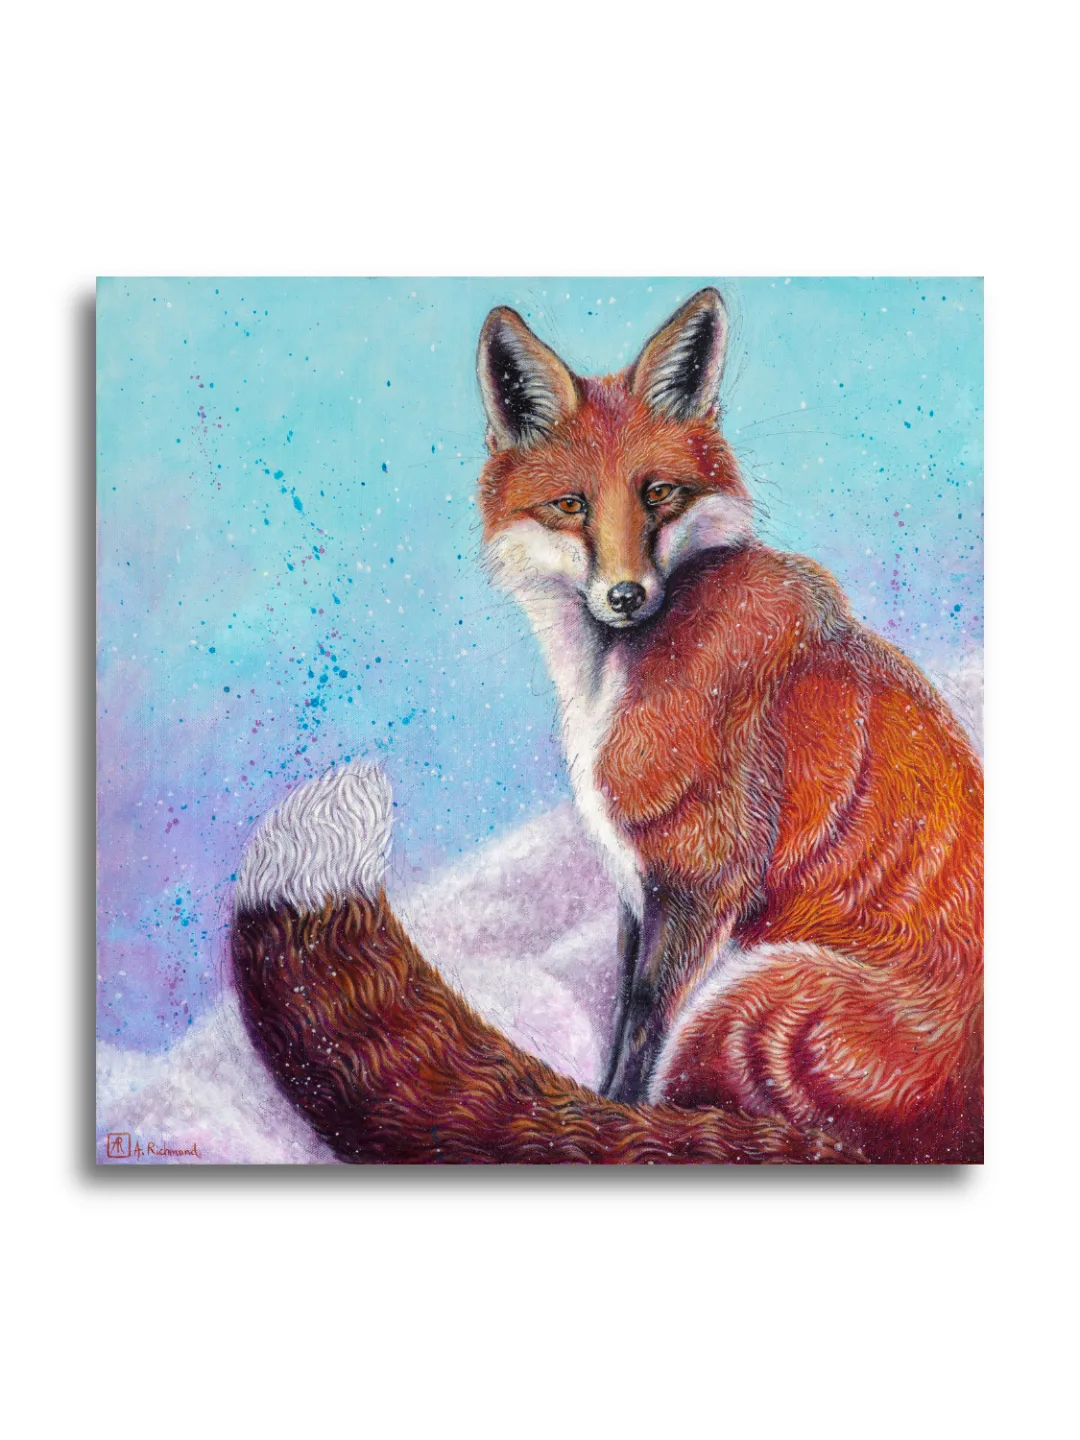 A Pause Between Acts by Ann Richmond - A beautiful Fine-Art Print of a resting Red Fox. Limited inventory remains in our Print Sale...